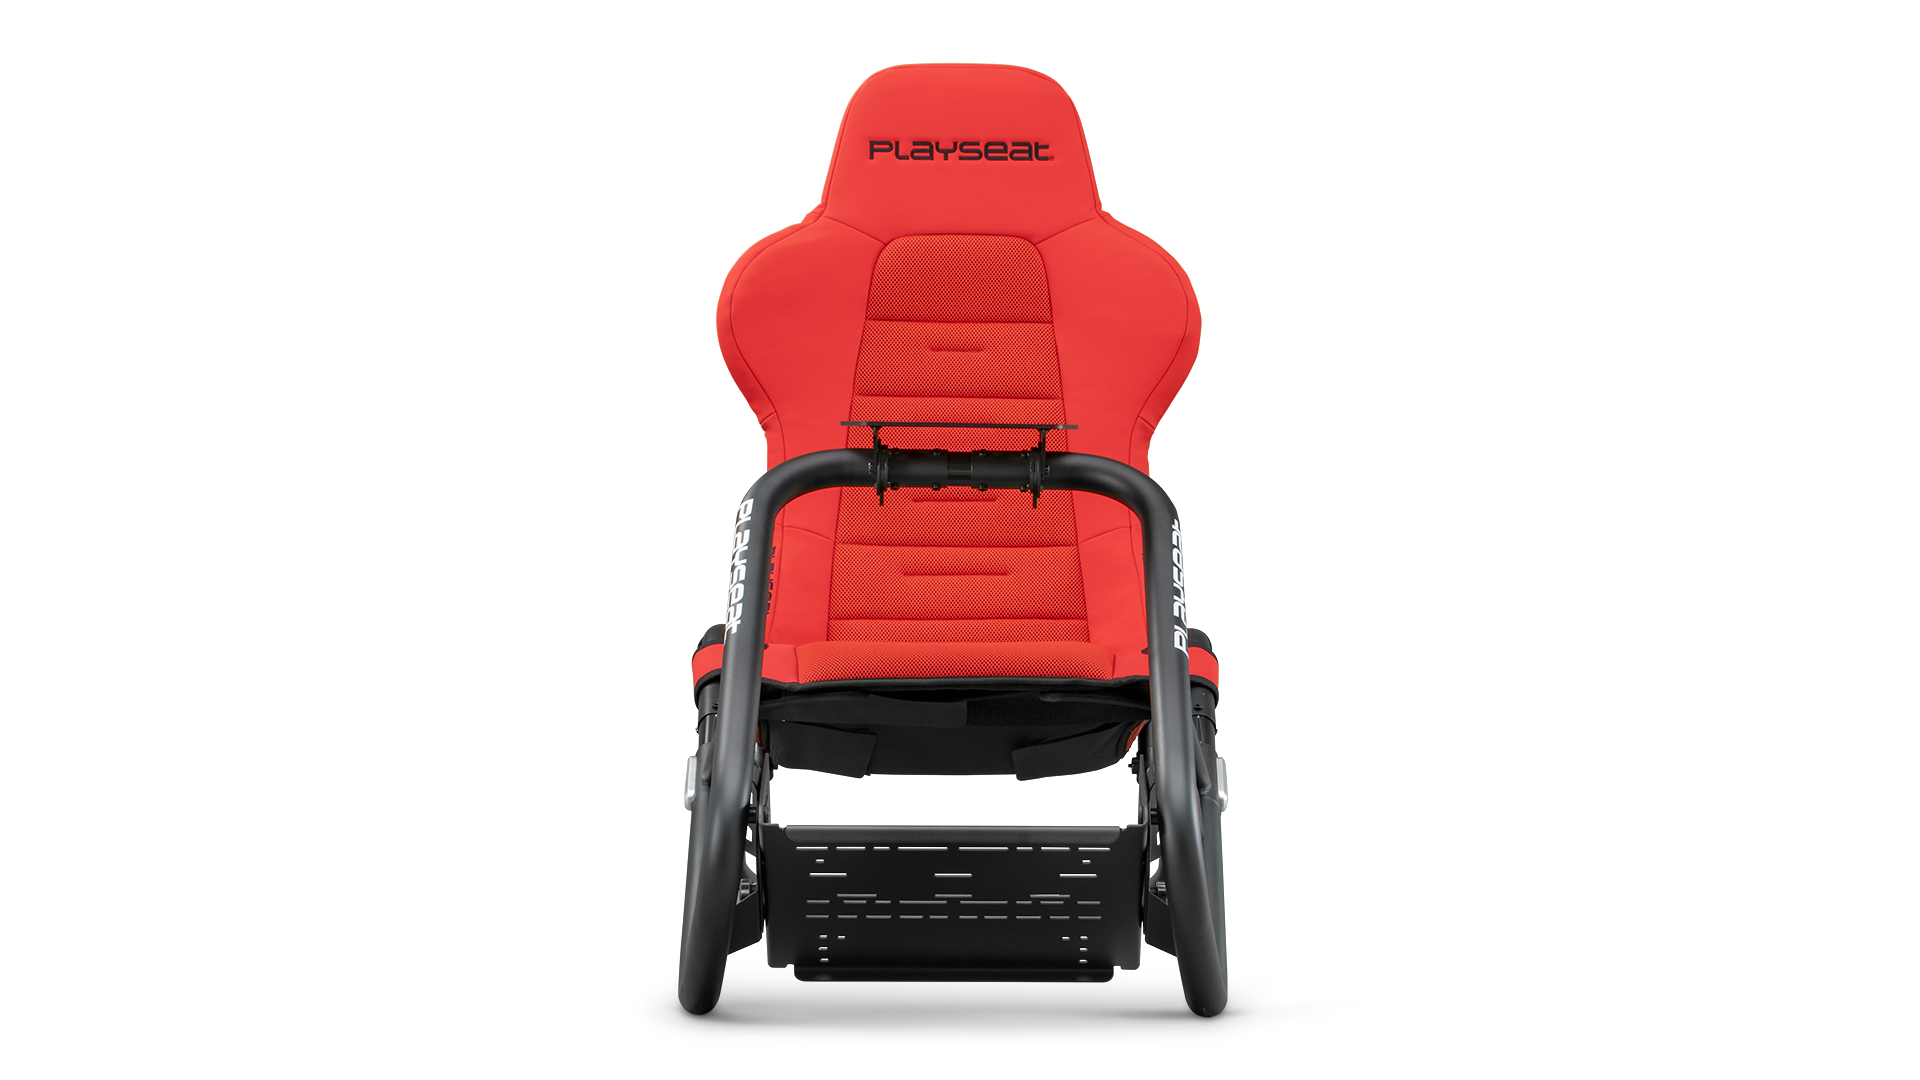 playseat-trophy-red-direct-drive-simulator-front-view-1920x1080-3.png